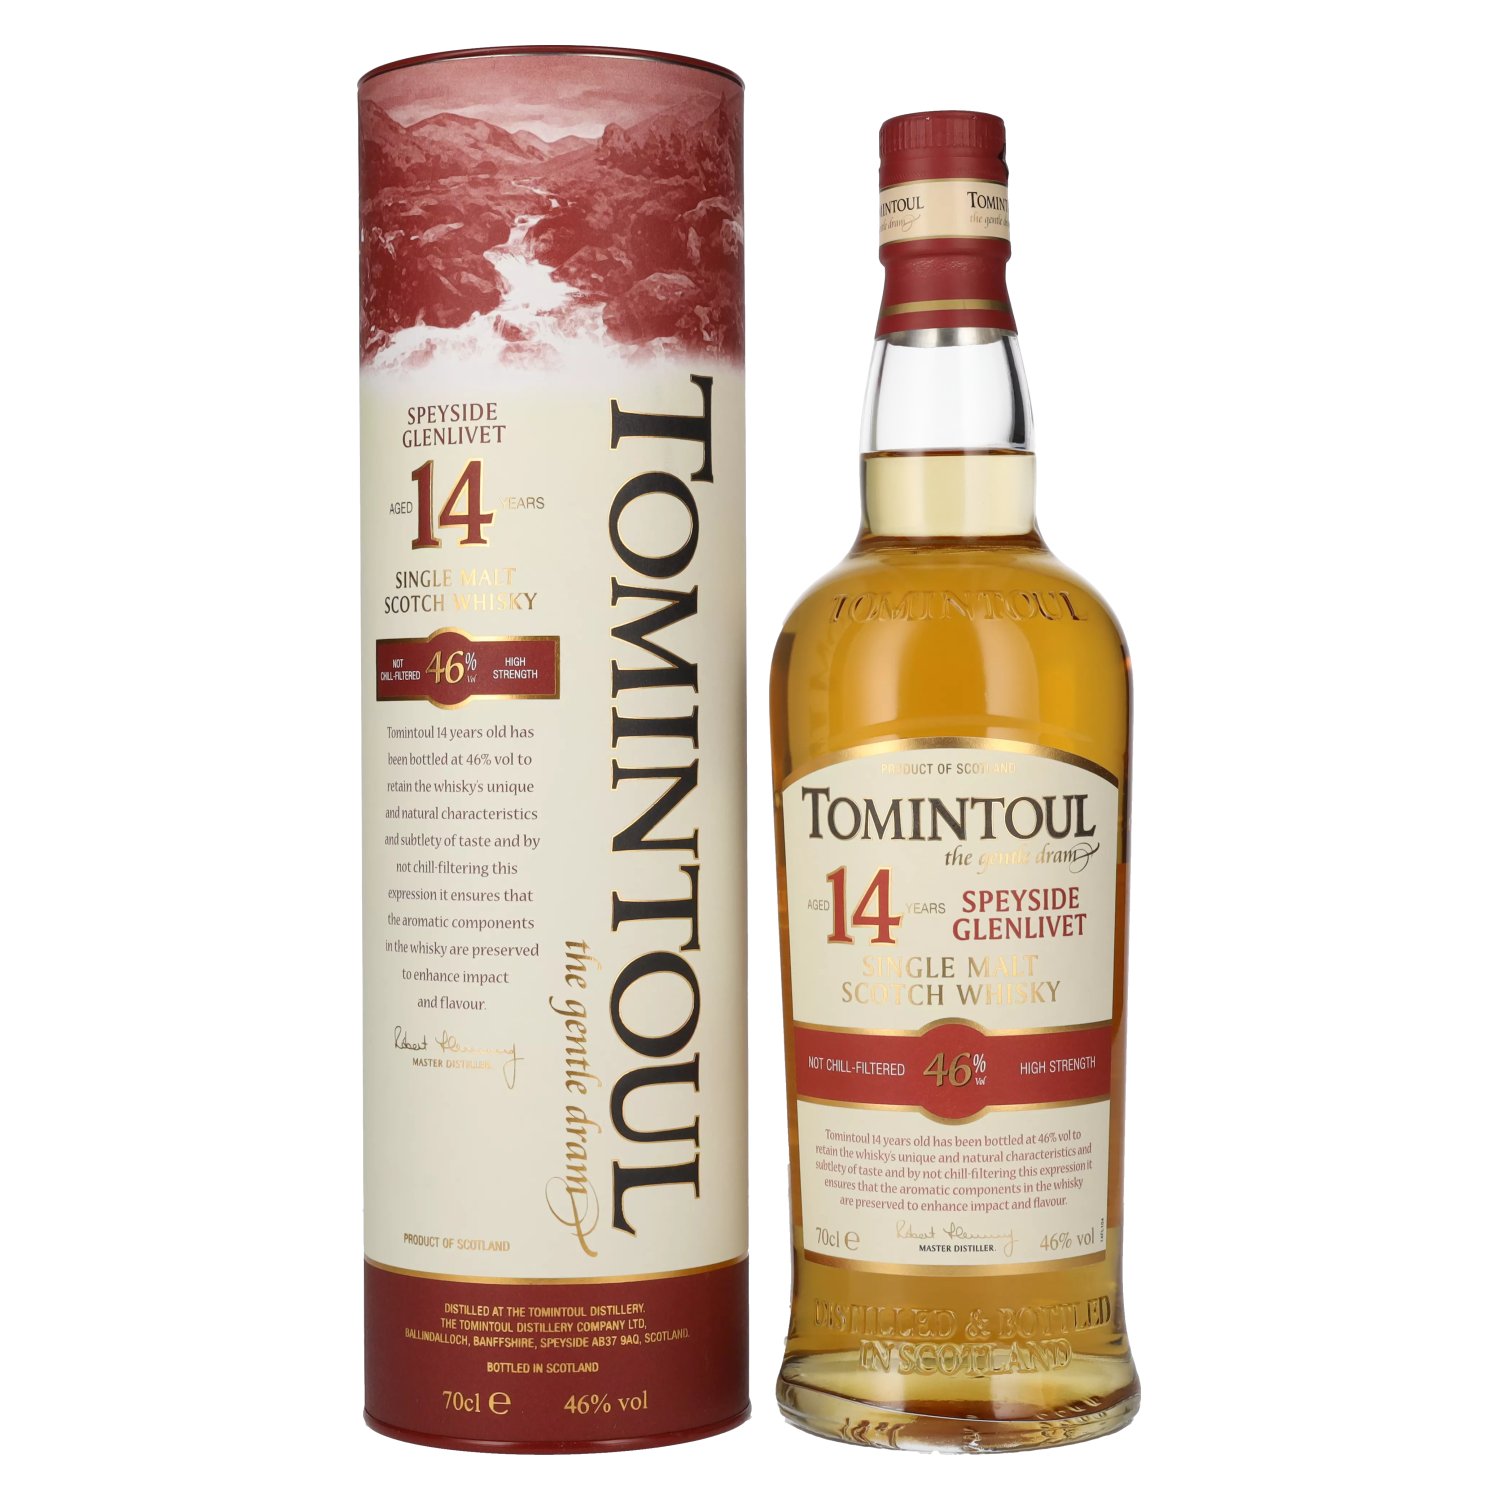 Single Geschenkbox Old 46% 0,7l Malt Whisky Tomintoul Vol. in Years 14 Scotch